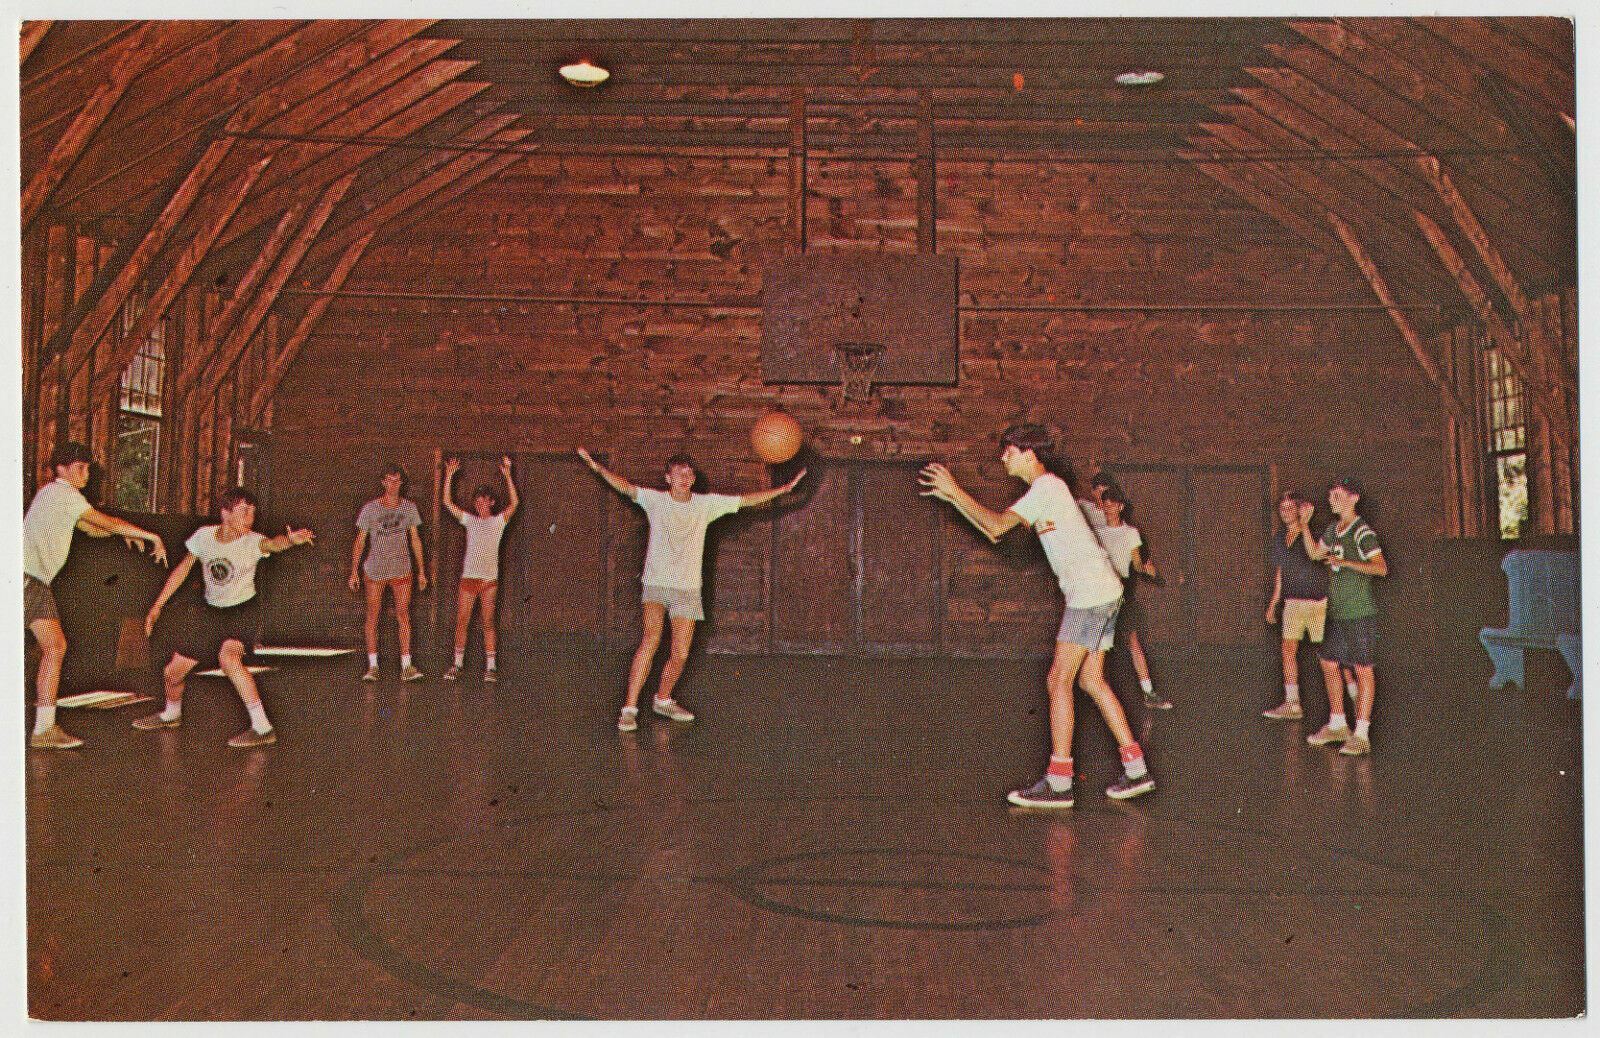 Basketball Game, Cashman Hall, Camp Notre Dame. Lake Spofford, New Hampshire